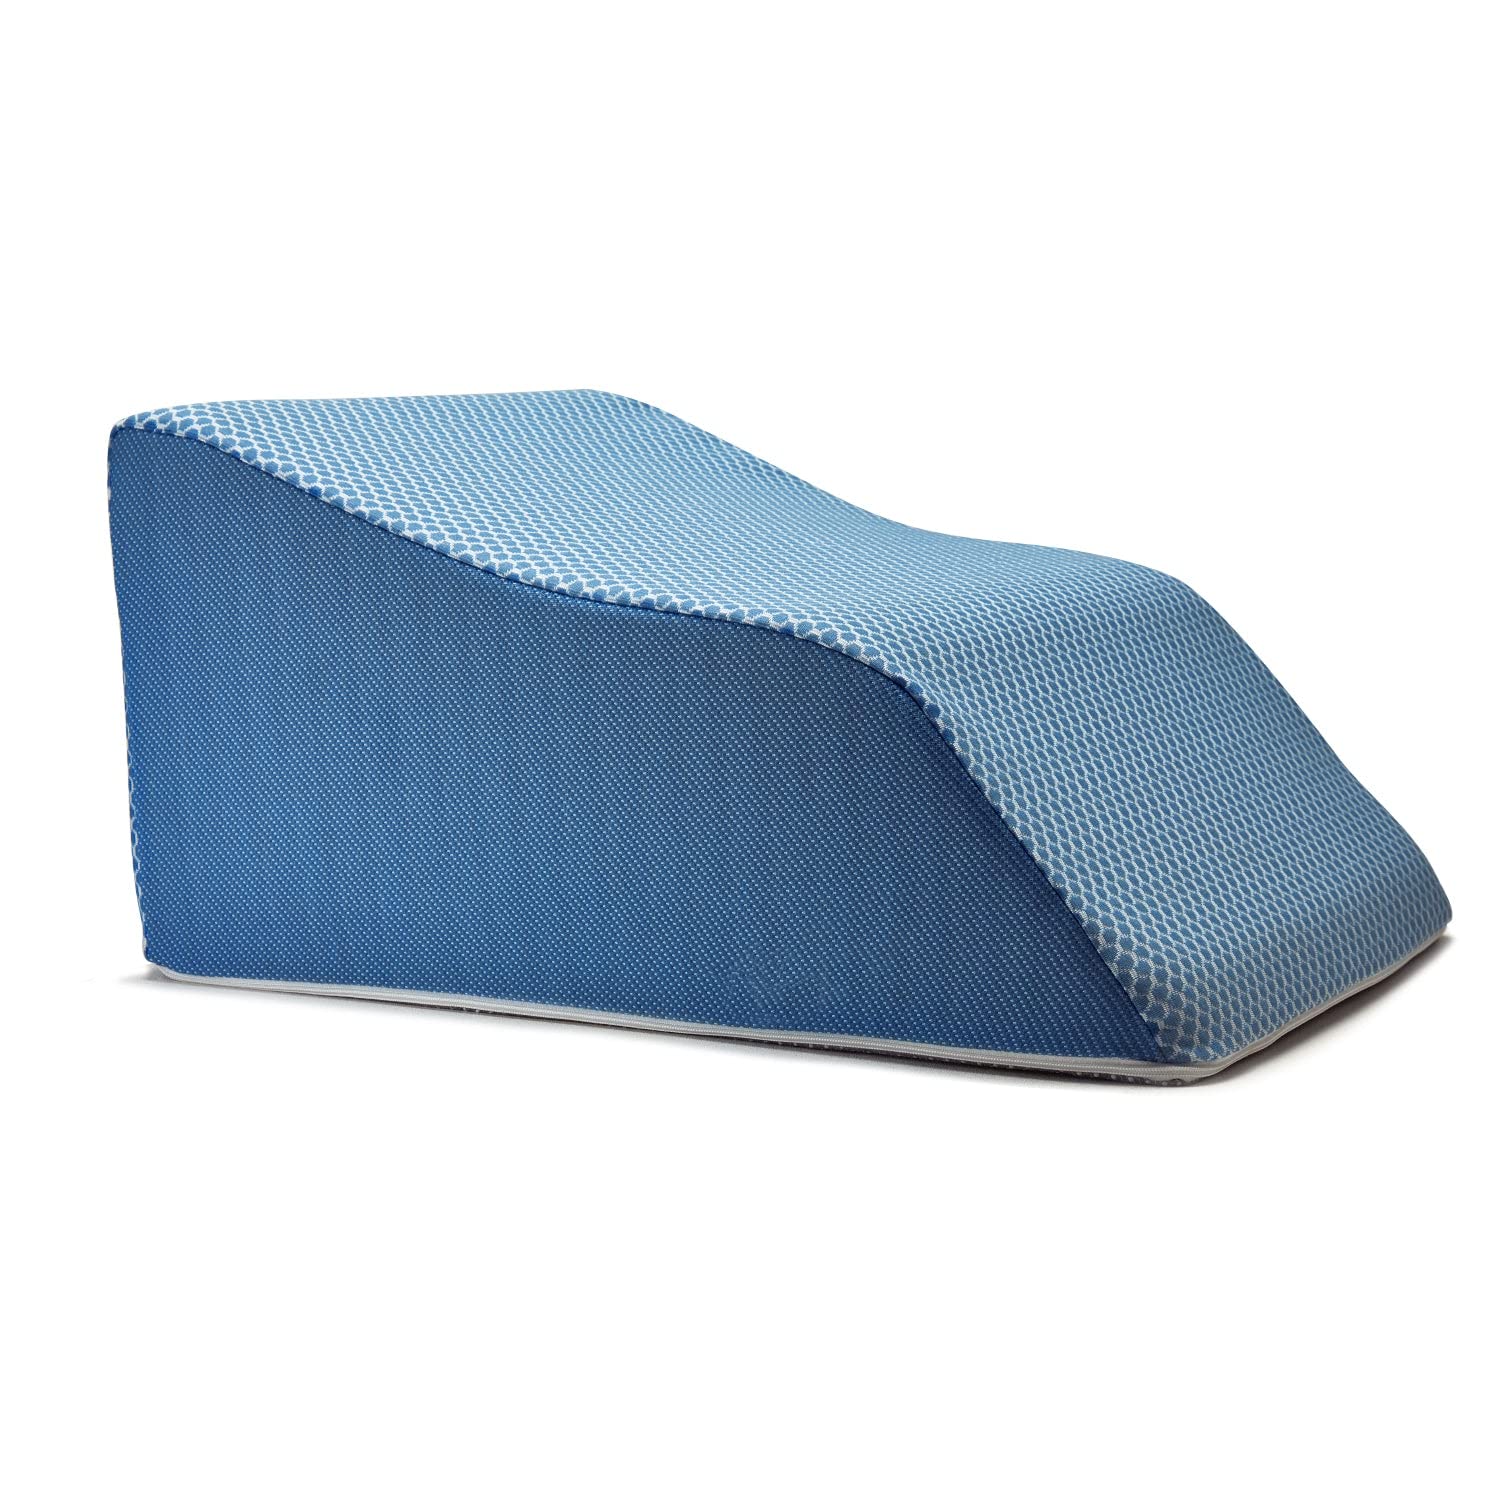 Lounge Doctor Elevating Leg Rest Pillow, Heather Grey, 24 in. Wide, Large, Uniquely Designed Incline Wedge for Vein Circulation, Leg Swelling, Lymphedema,Leg and Back Pain, Relaxation